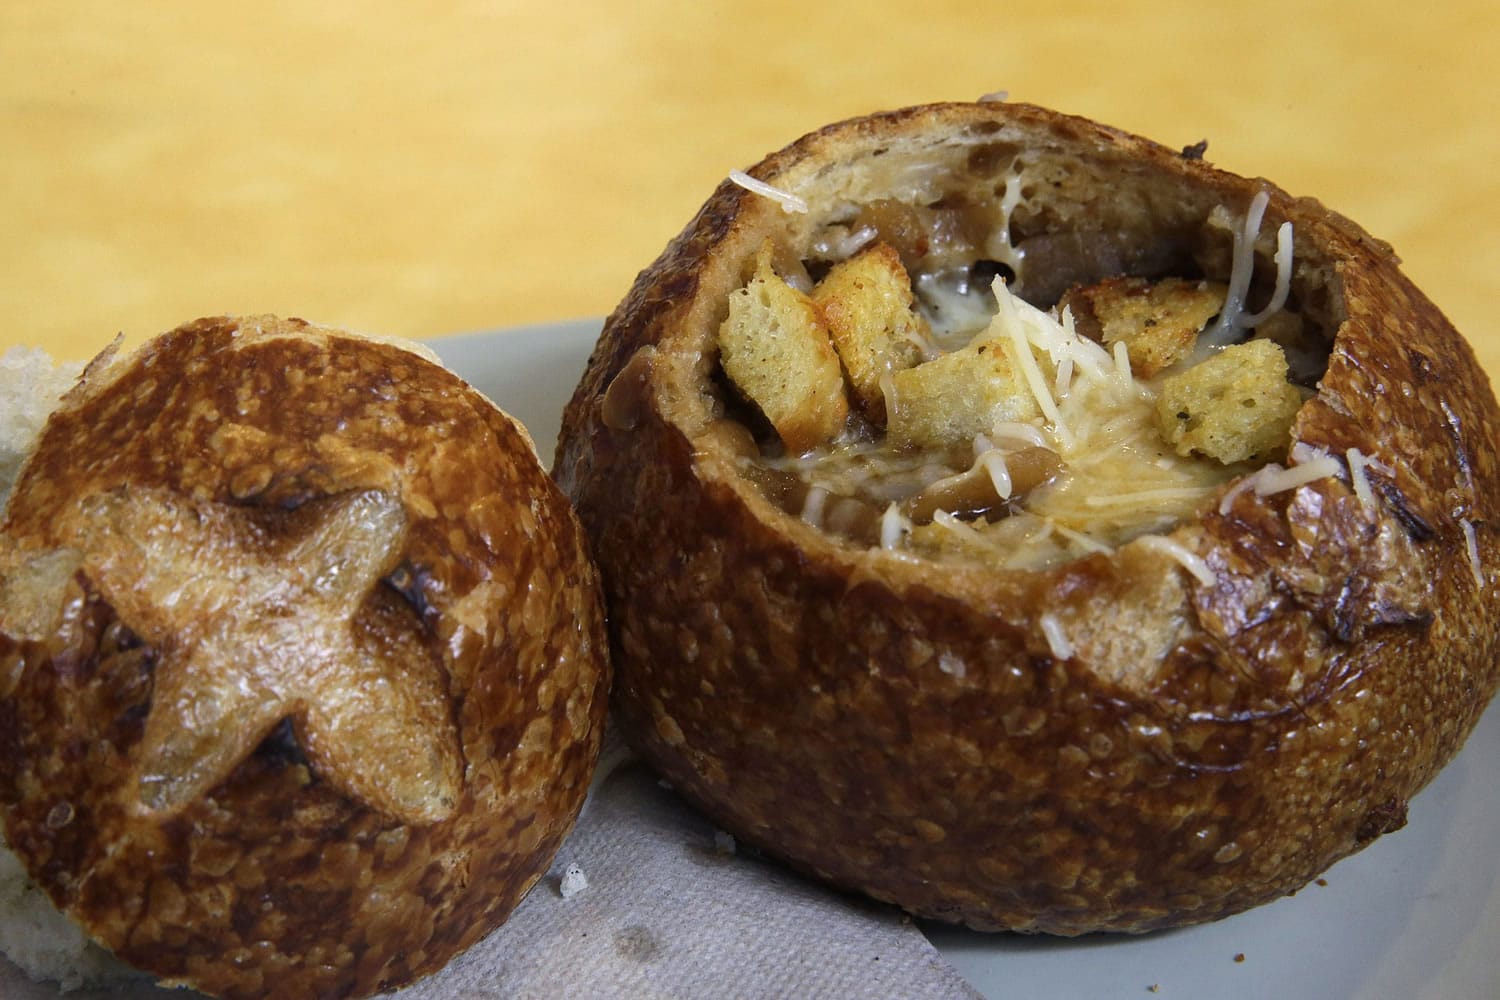 A Bistro French Onion Soup Bread Bowl is seen at a Panera bread restaurant, Tuesday, June 9, 2015, in New York. New York City could become the first city in the U.S. to require a warning label on high-sodium menu items at chain restaurants, health officials told The Associated Press on Tuesday. A Bistro French Onion Soup Bread Bowl contains more sodium than the recommended daily limit of 2,300 milligrams, which is equal to about 1 teaspoon of salt.